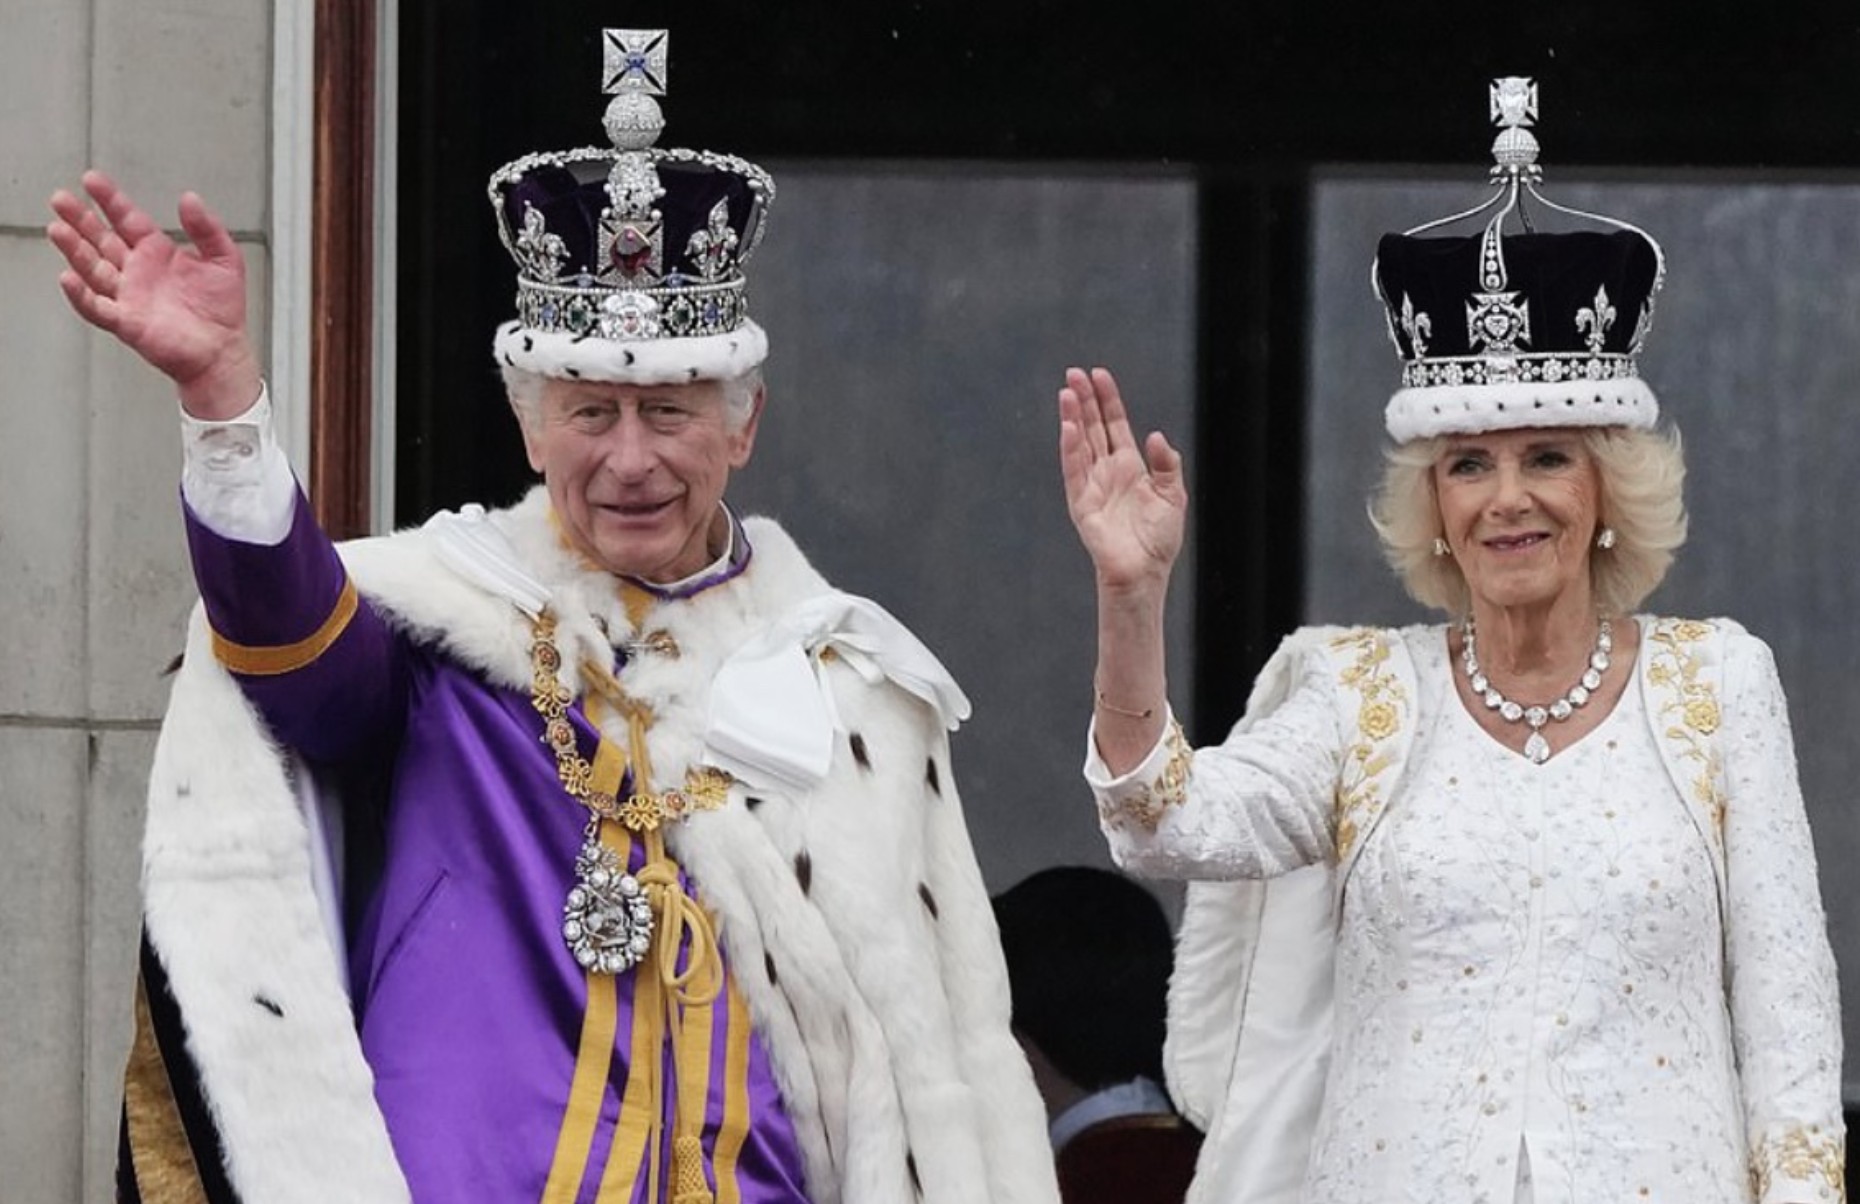 King Charles III official coronation photos released, historic one has King with two heirs